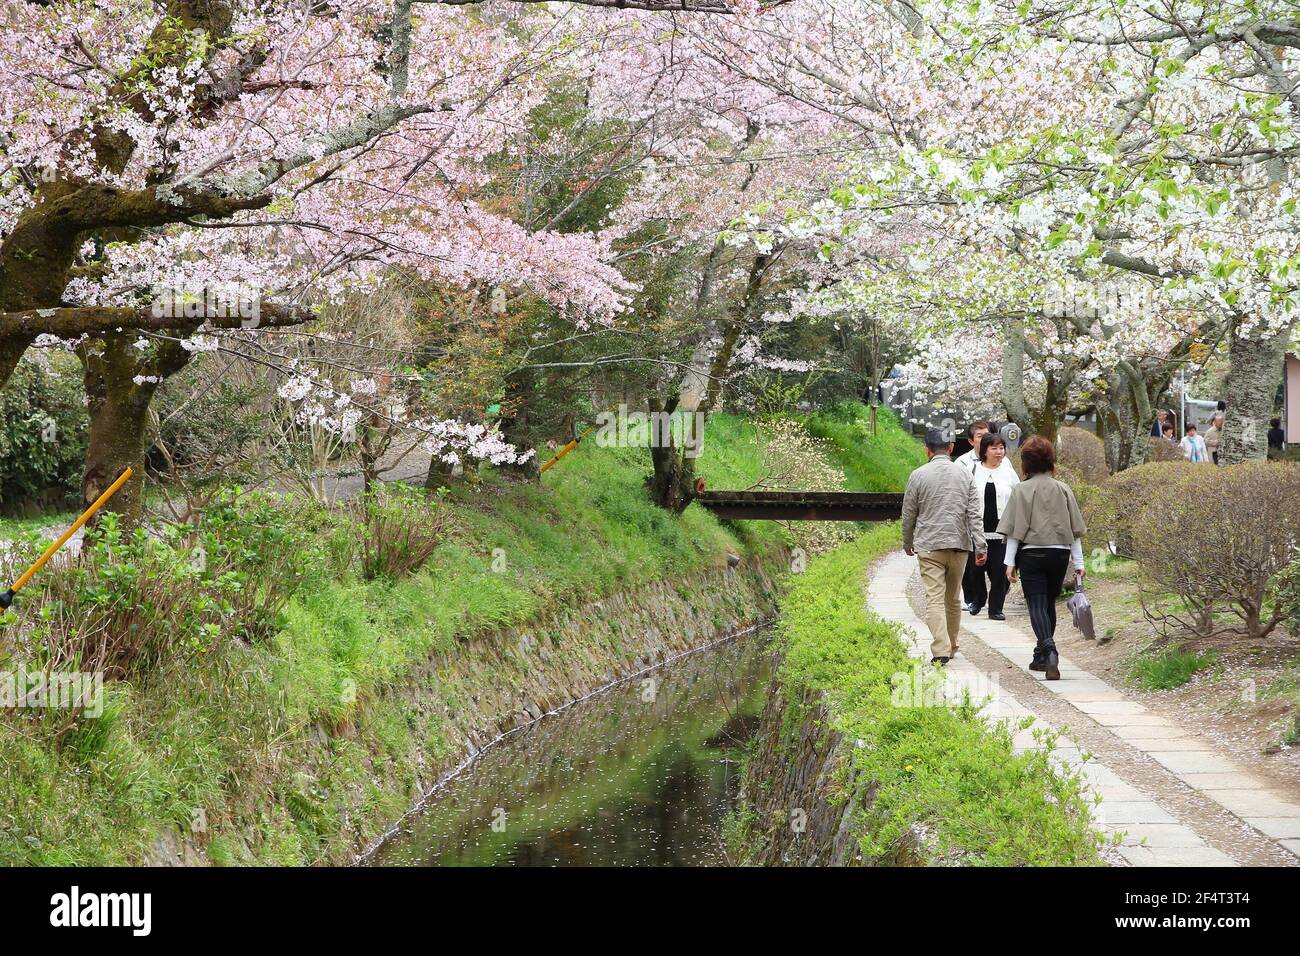 KYOTO, JAPAN - APRIL 16, 2012: People visit Philosopher's Walk (or Philosopher's Path) in Kyoto, Japan. The cherry blossom lined trail is a major Japa Stock Photo